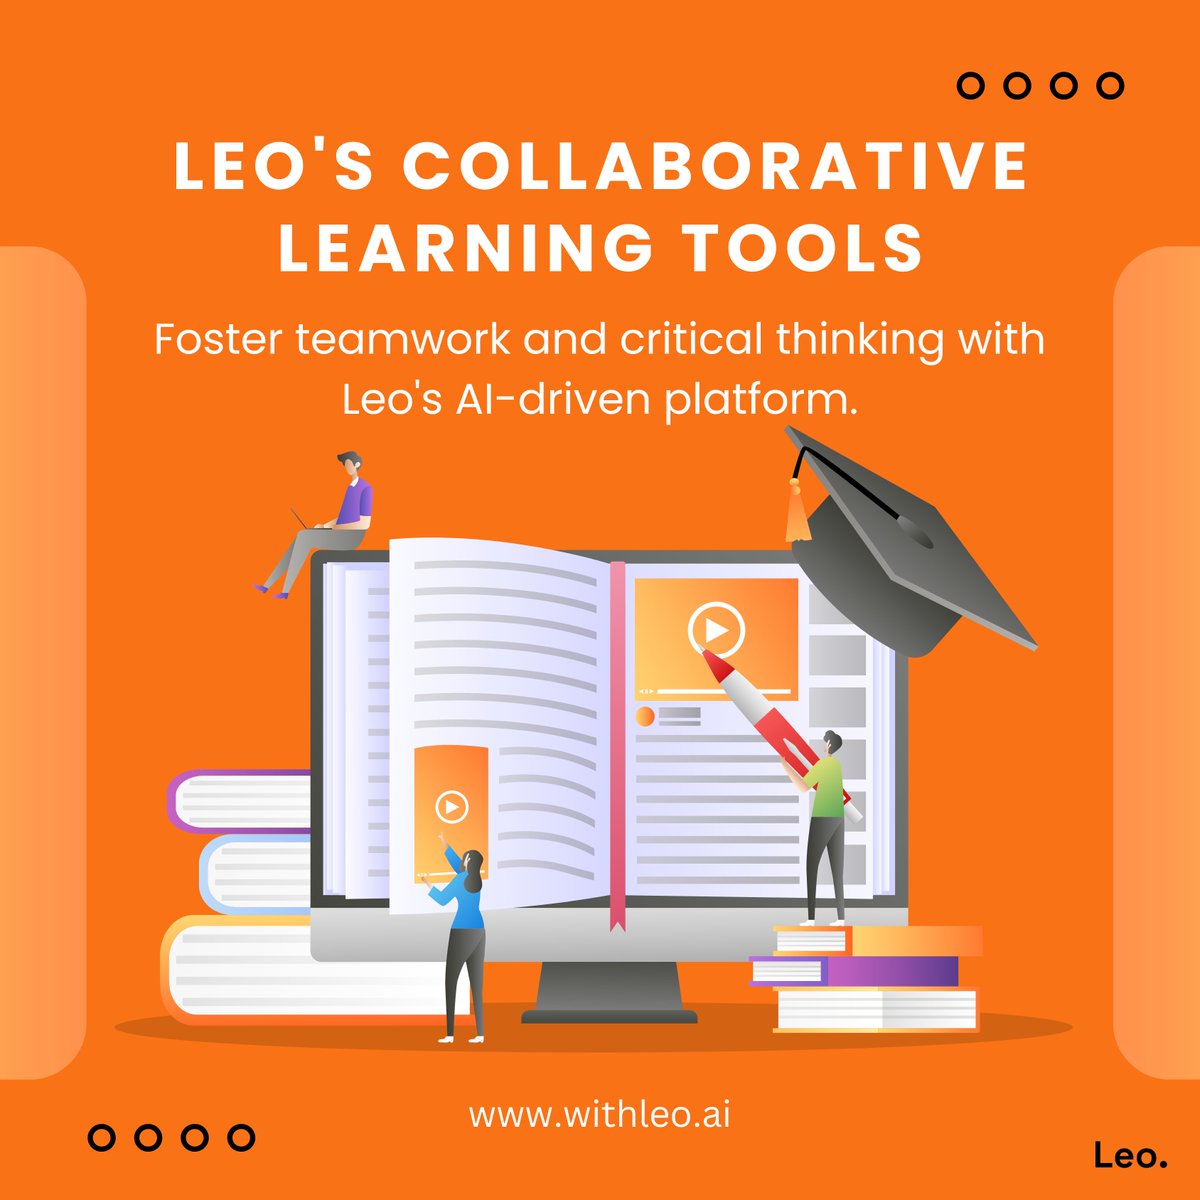 Leo's AI tools foster collaborative learning, generating group assignments for shared goals, while providing instant feedback for skill improvement. Explore more at withleo.ai

#AI #edtech #education #teaching #AIinEducation #TeacherTools #TeachingAssistants